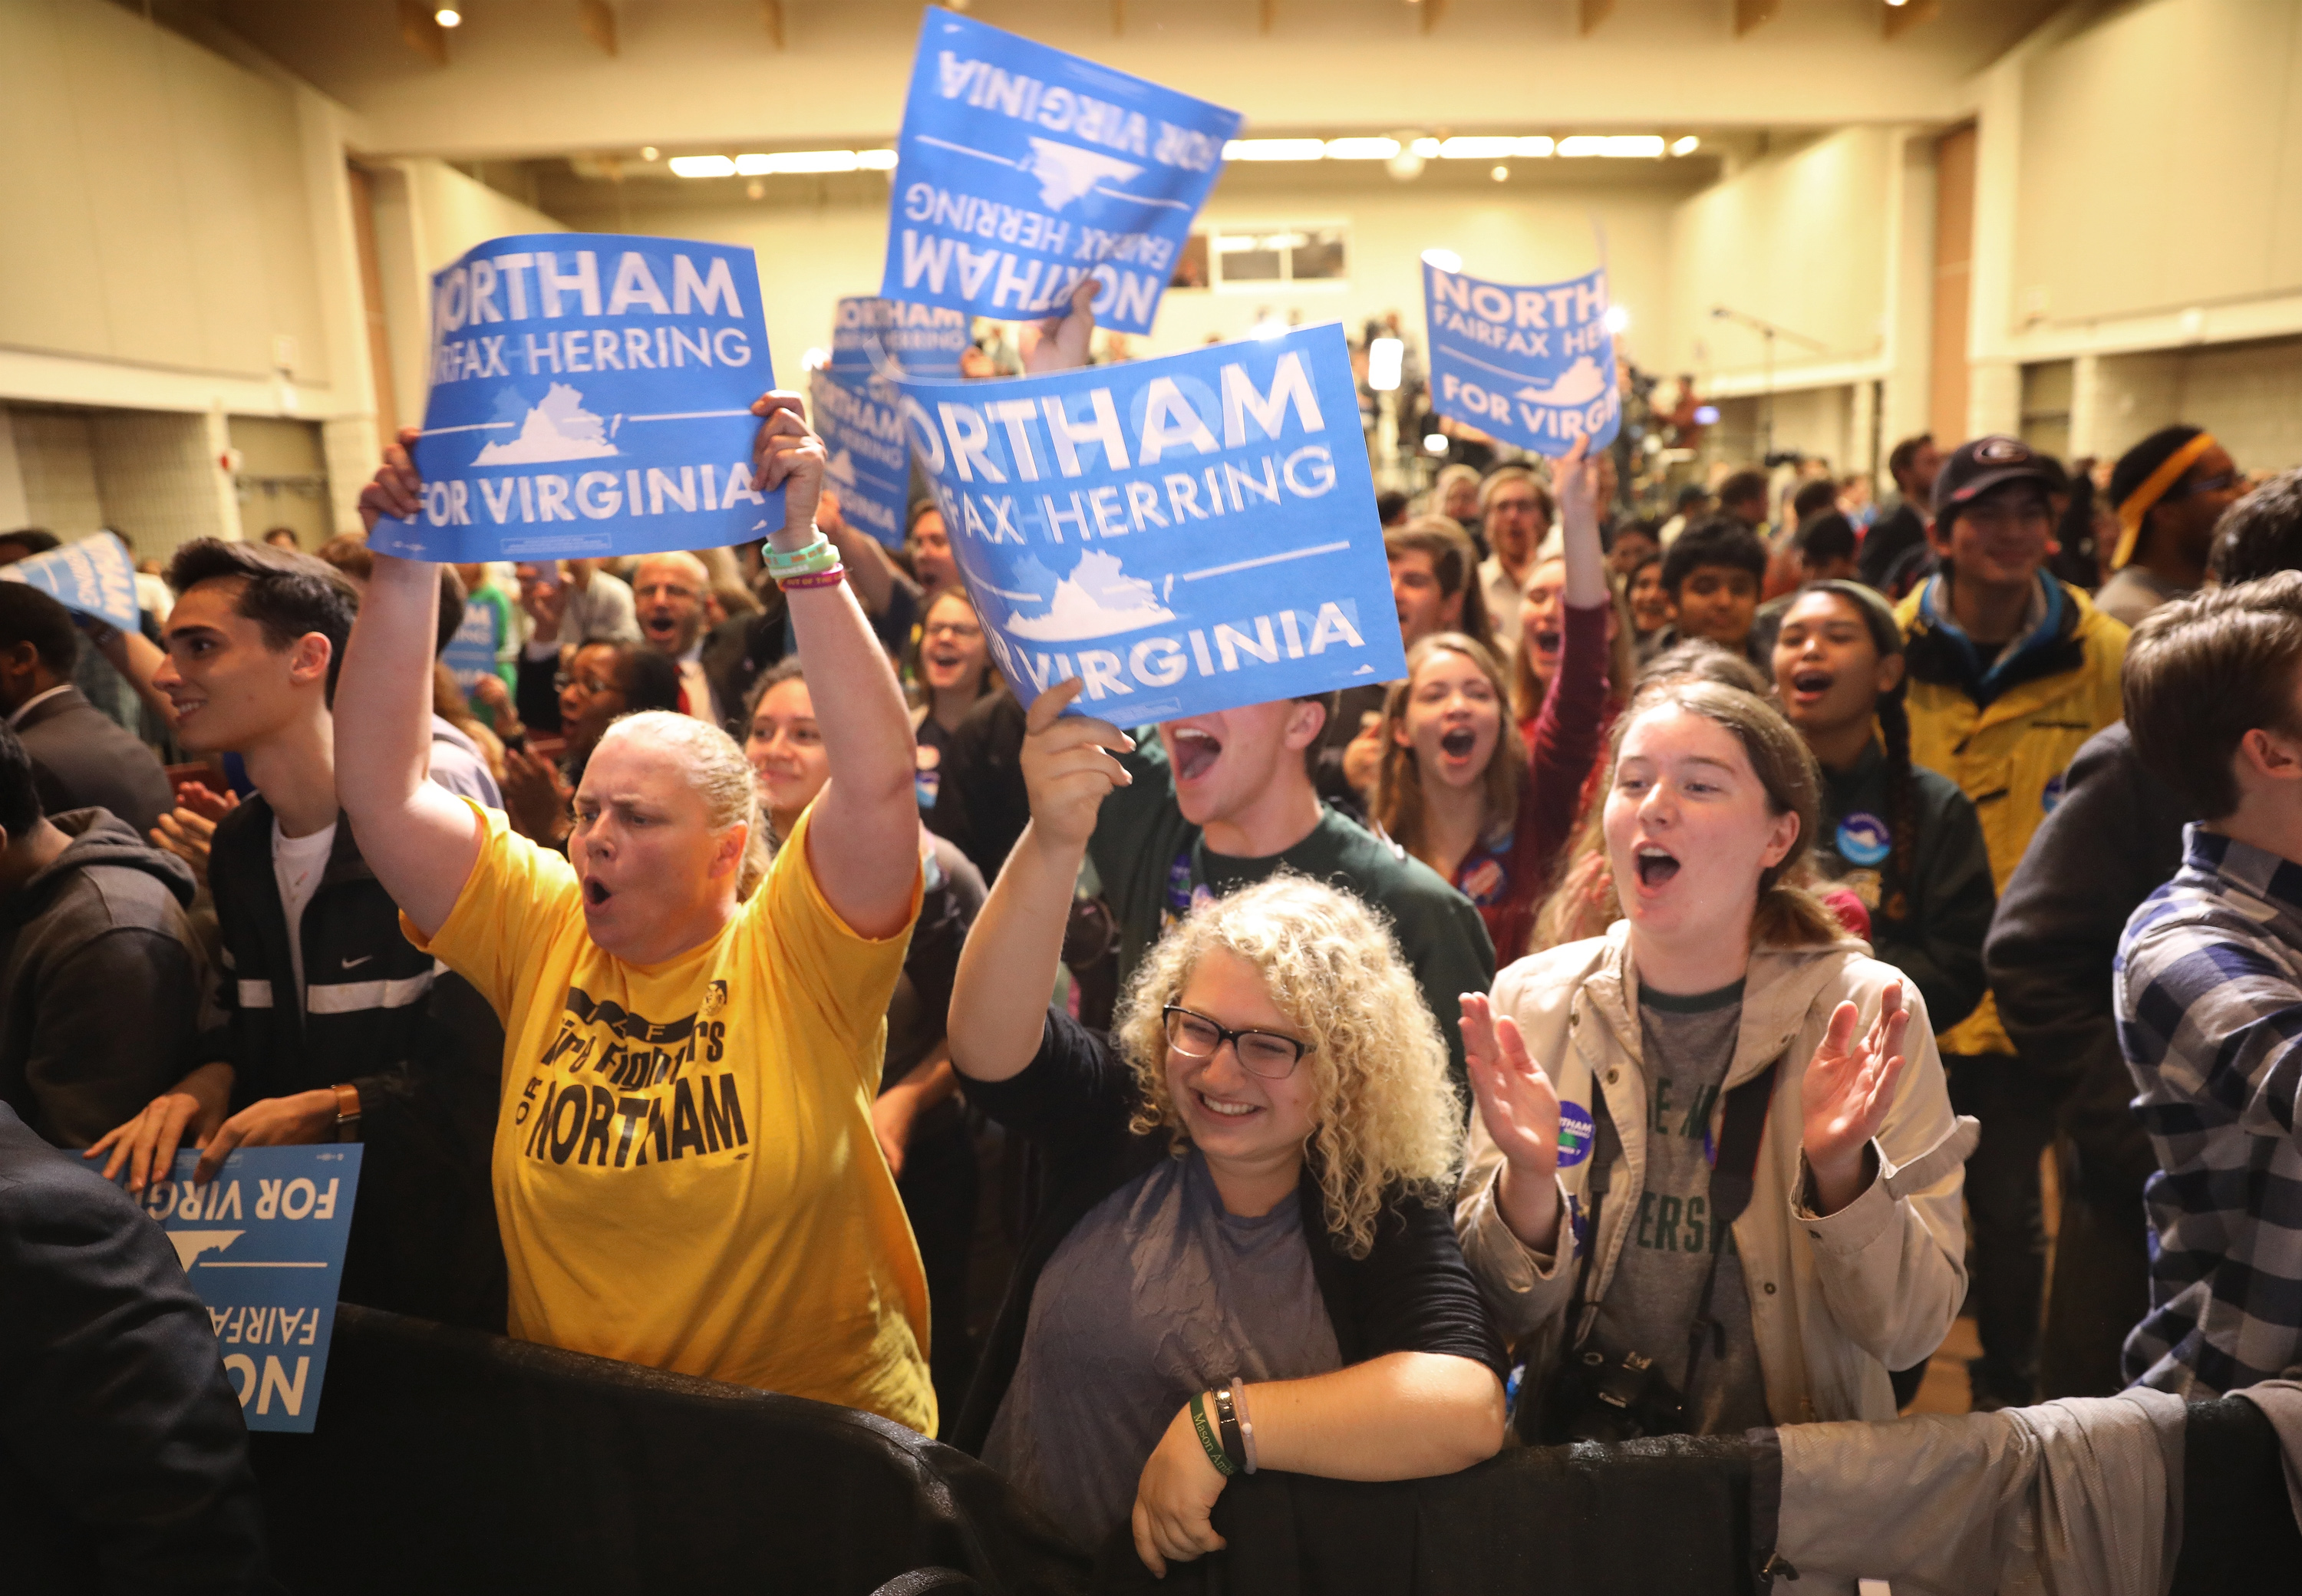 FAIRFAX, VA - NOVEMBER 07:  Supporters of Ralph Northam, the Democratic candidate for governor of Virginia, celebrate as early projections indicated a Northam victory at an election night rally November 7, 2017 in Fairfax, Virginia. Northam has fought a close race with Republican candidate Ed Gillespie.  (Photo by Win McNamee/Getty Images) (Win McNamee—Getty Images)